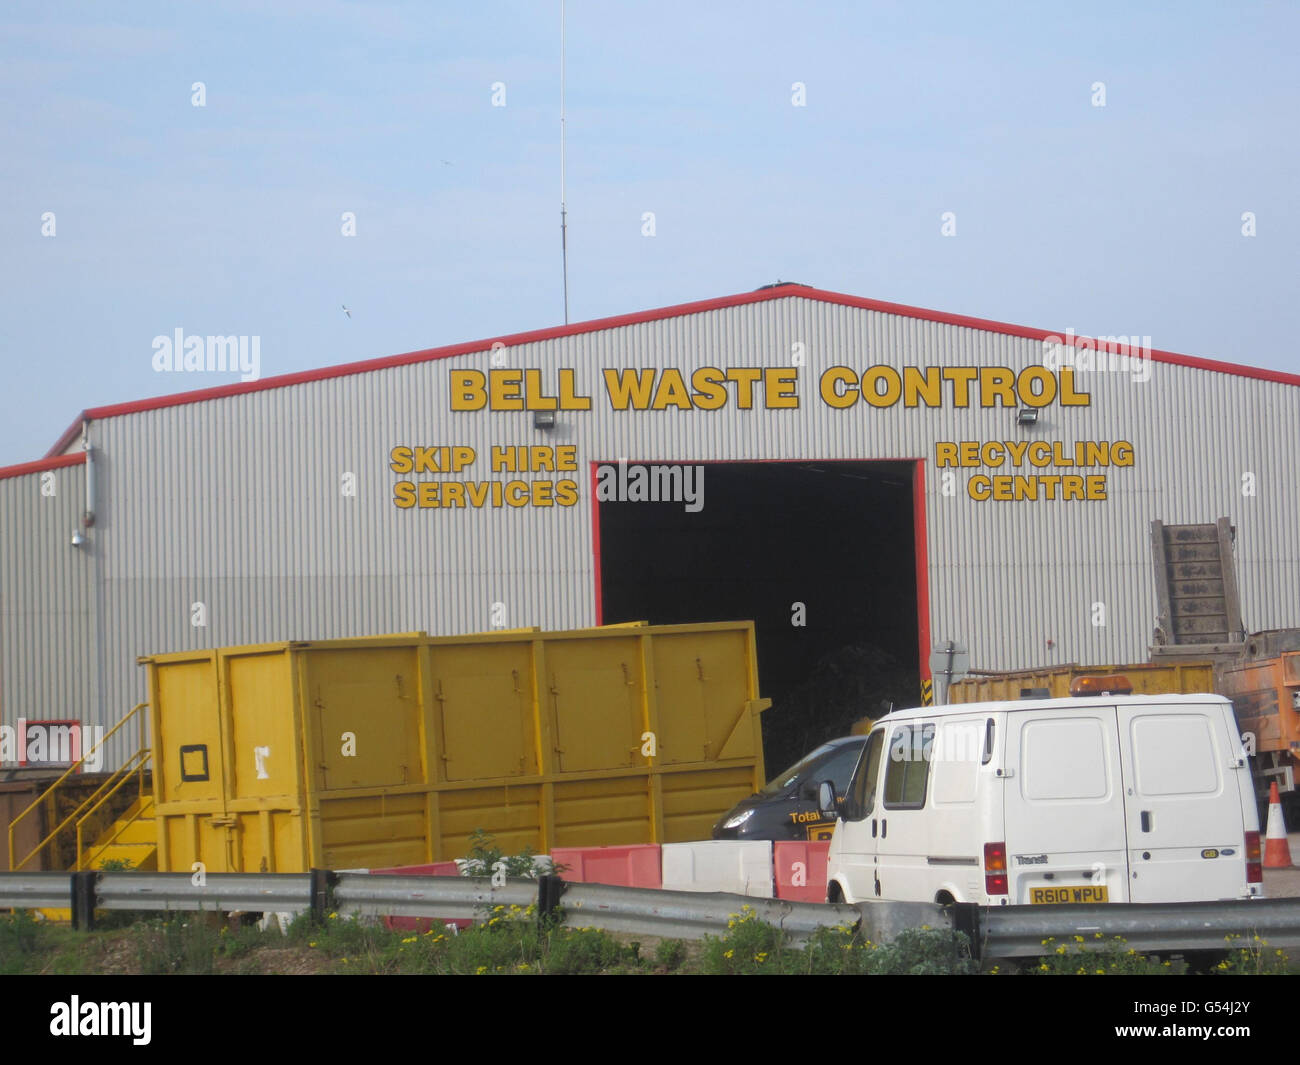 A general view of Bell Waste Control site in Scunthorpe, where the body of a baby was found today in waste being sorted at the recycling plant. Stock Photo